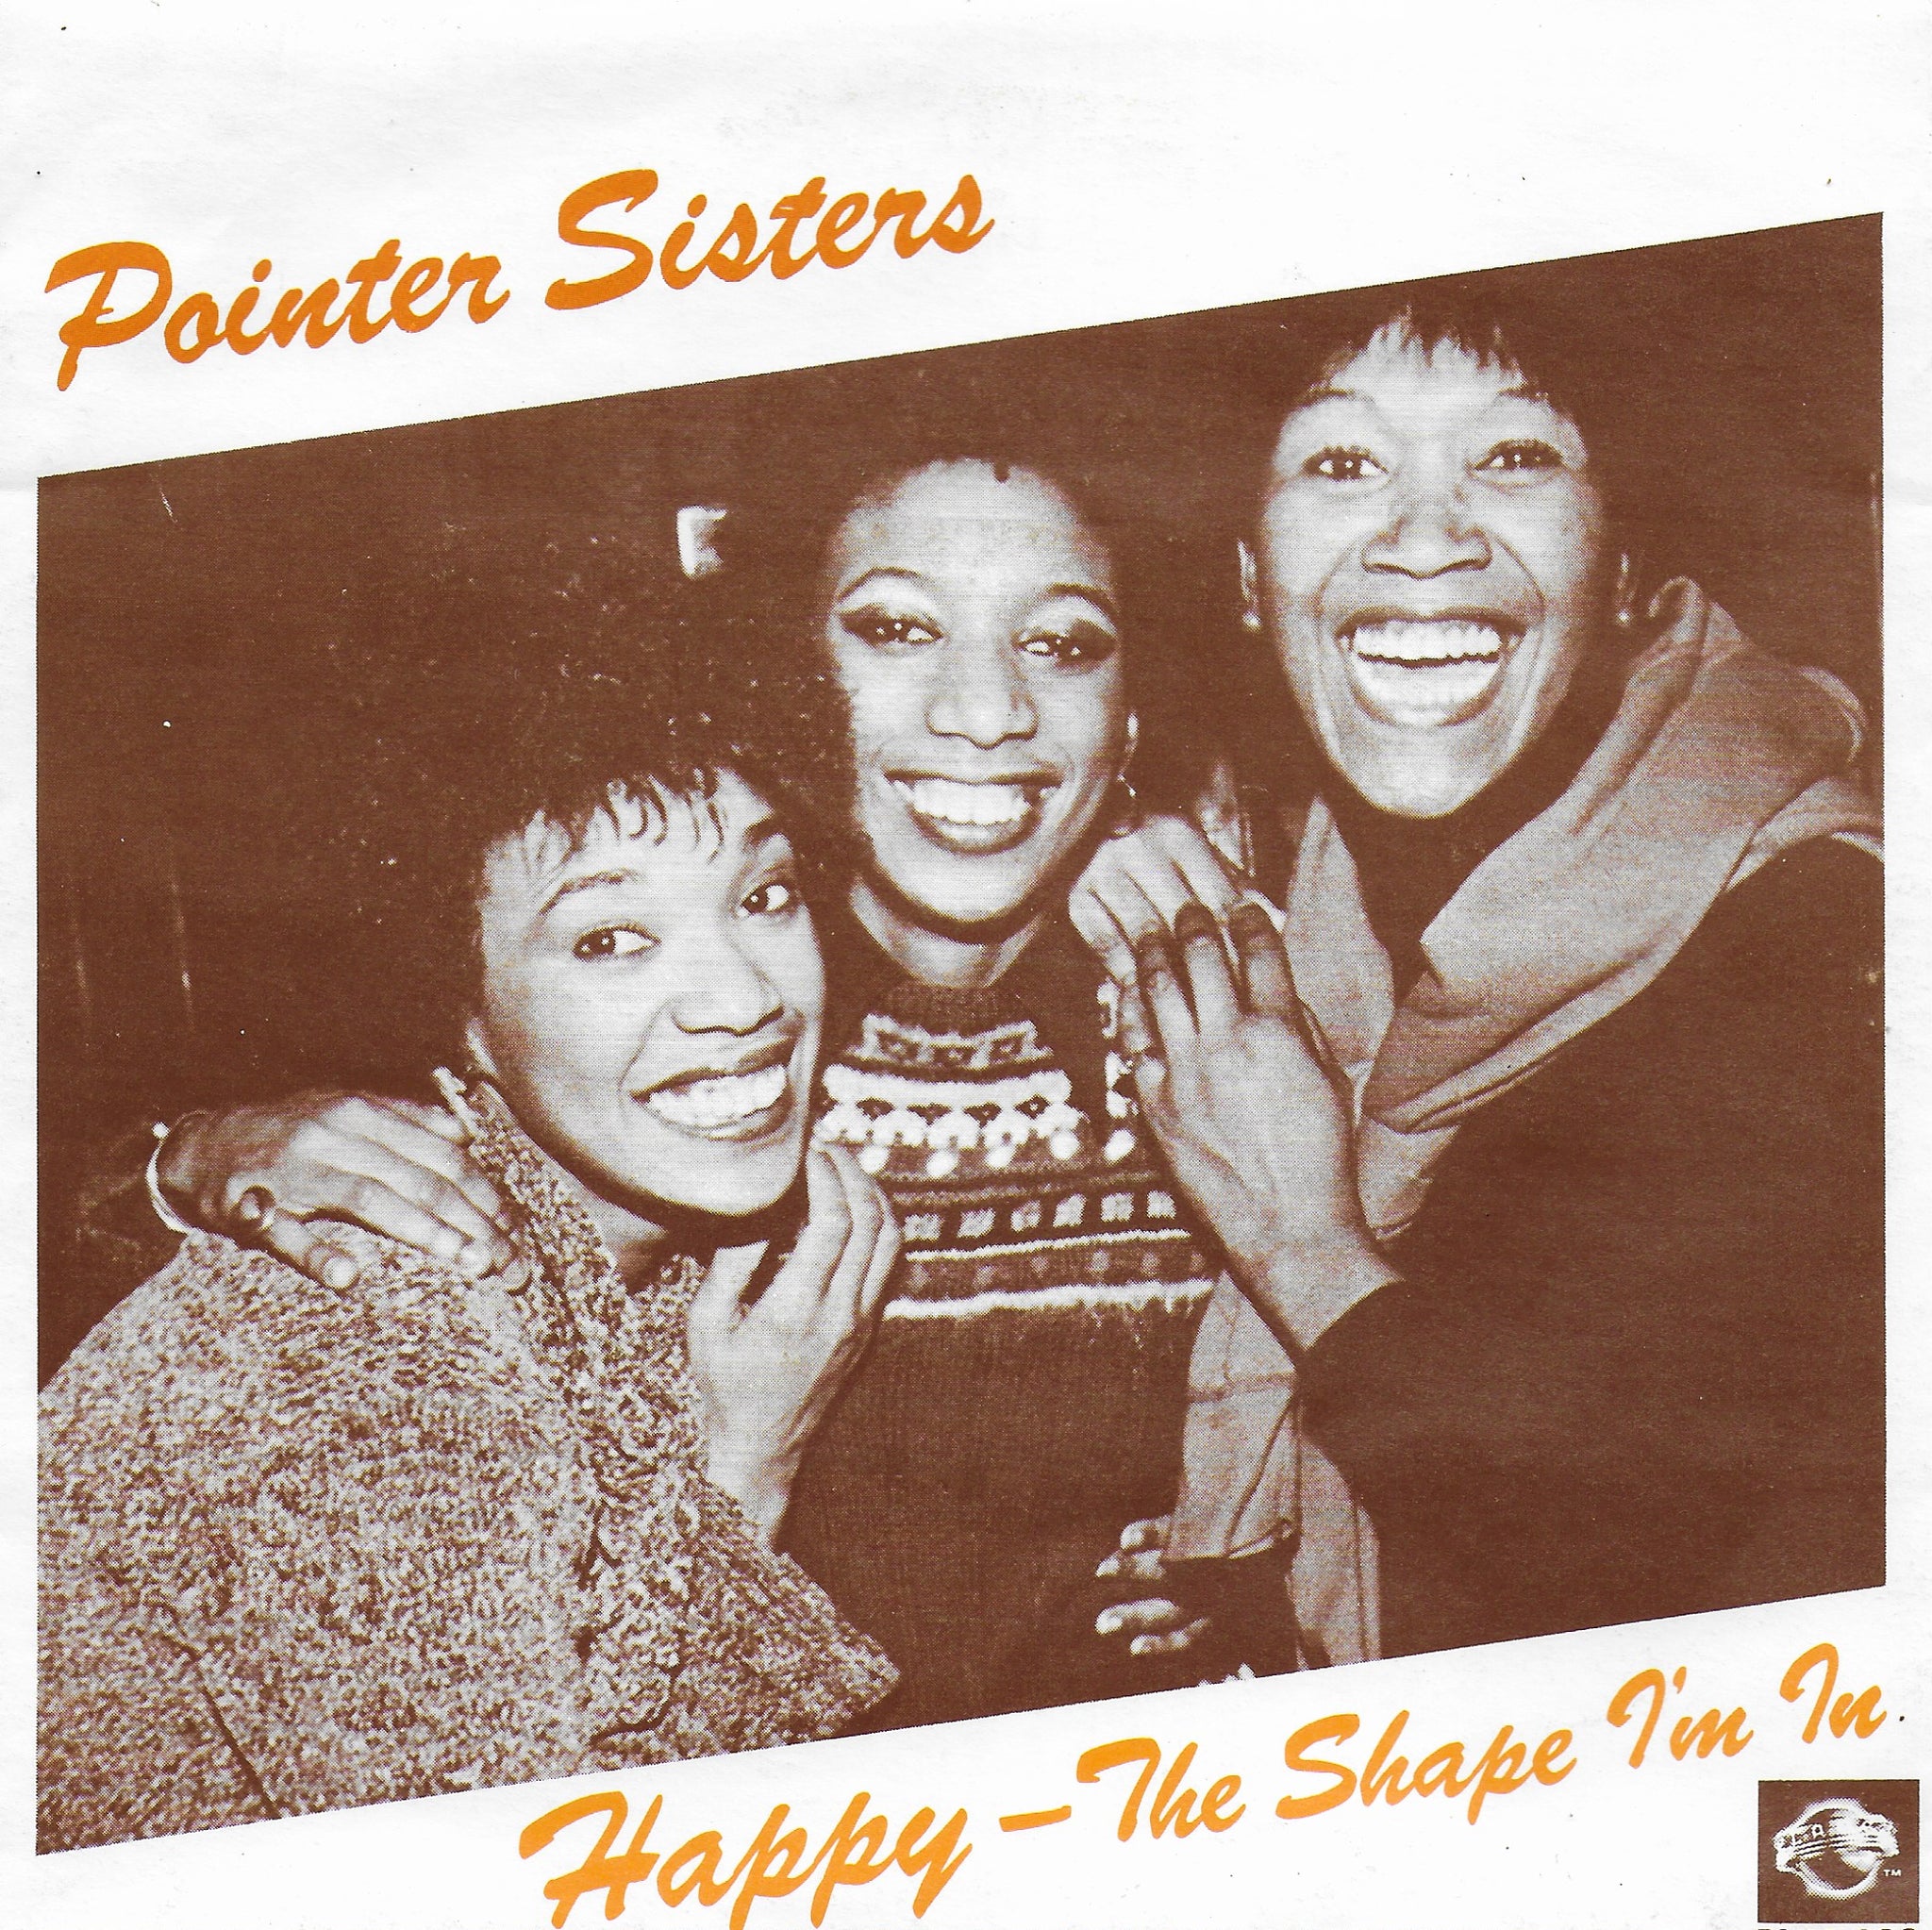 Pointer Sisters - Happy